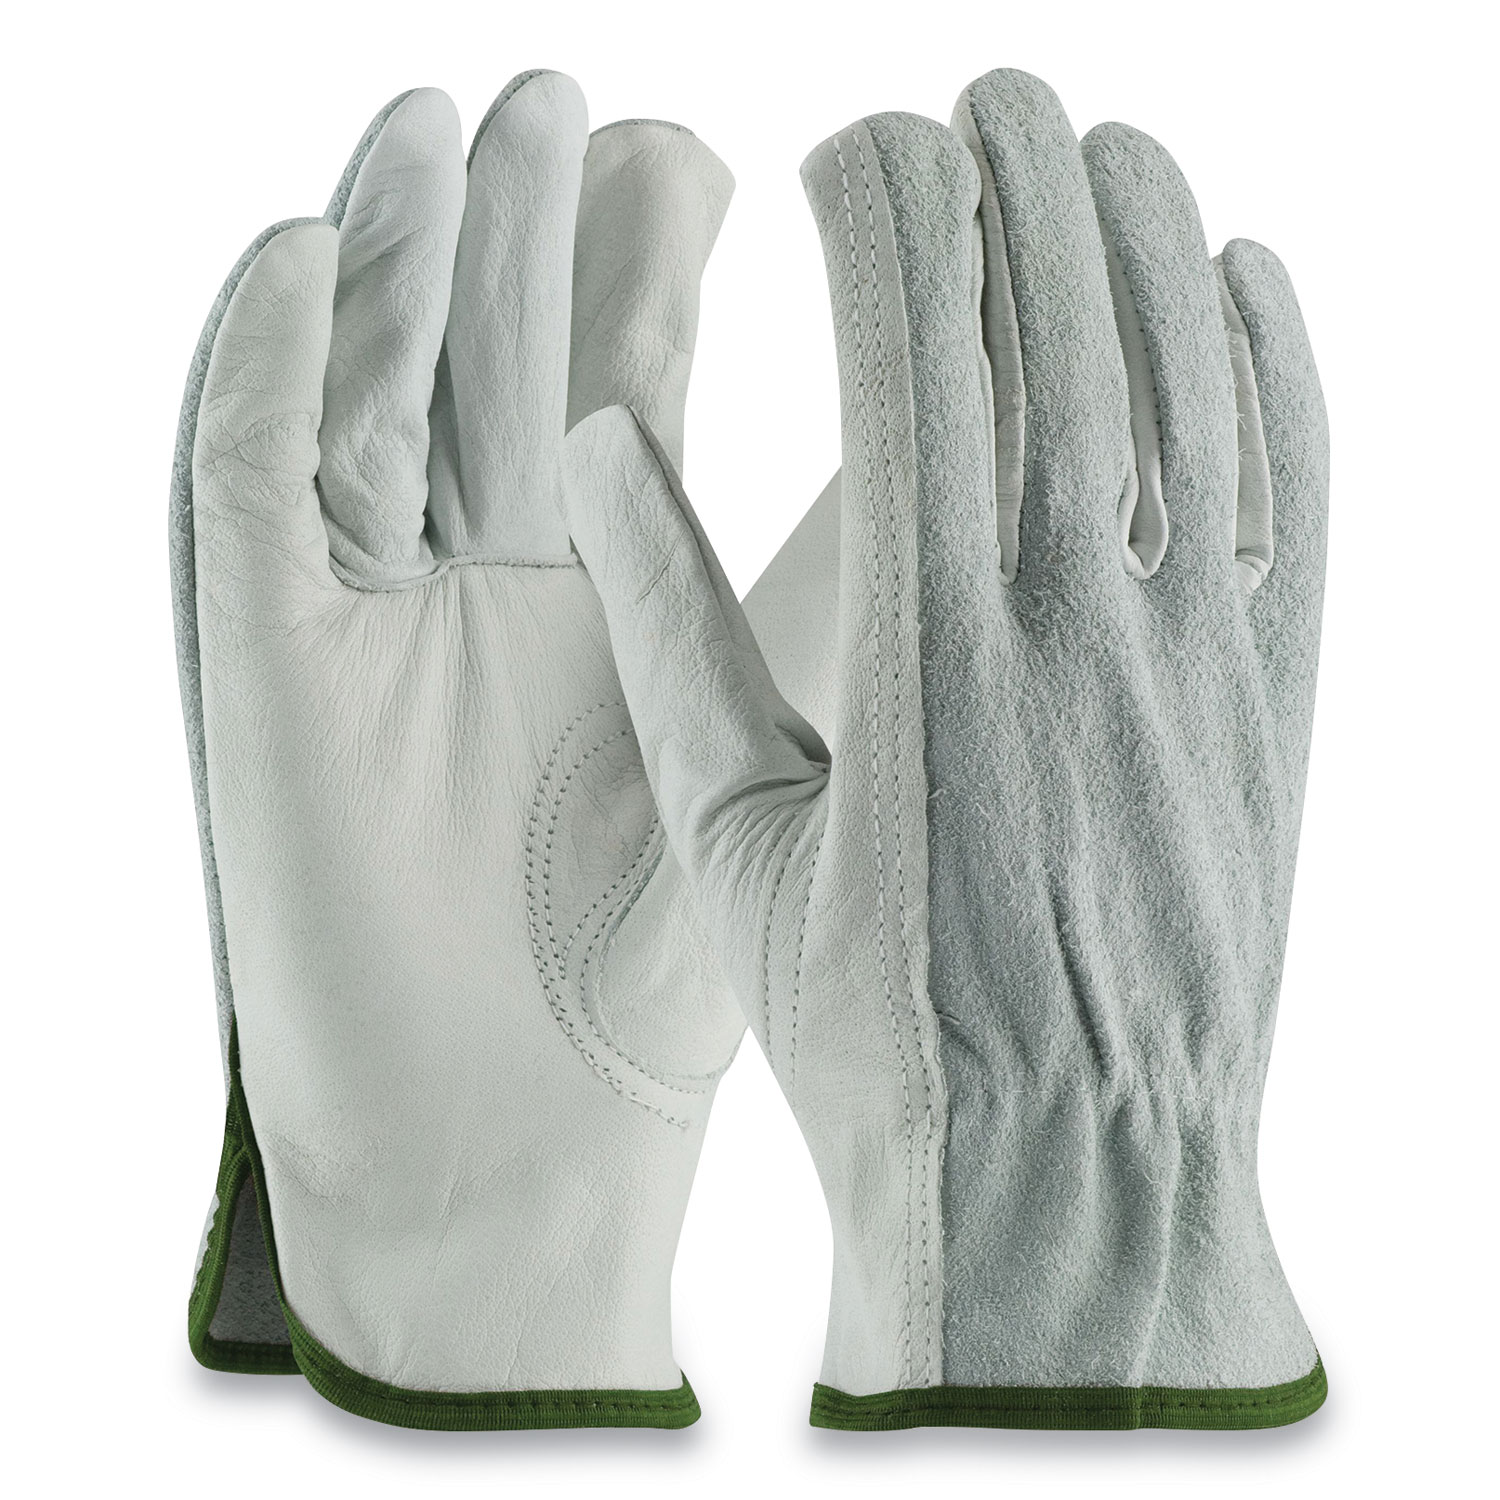 Image of Top-Grain Leather Drivers Gloves with Shoulder-Split Cowhide Leather Back, Medium, Gray